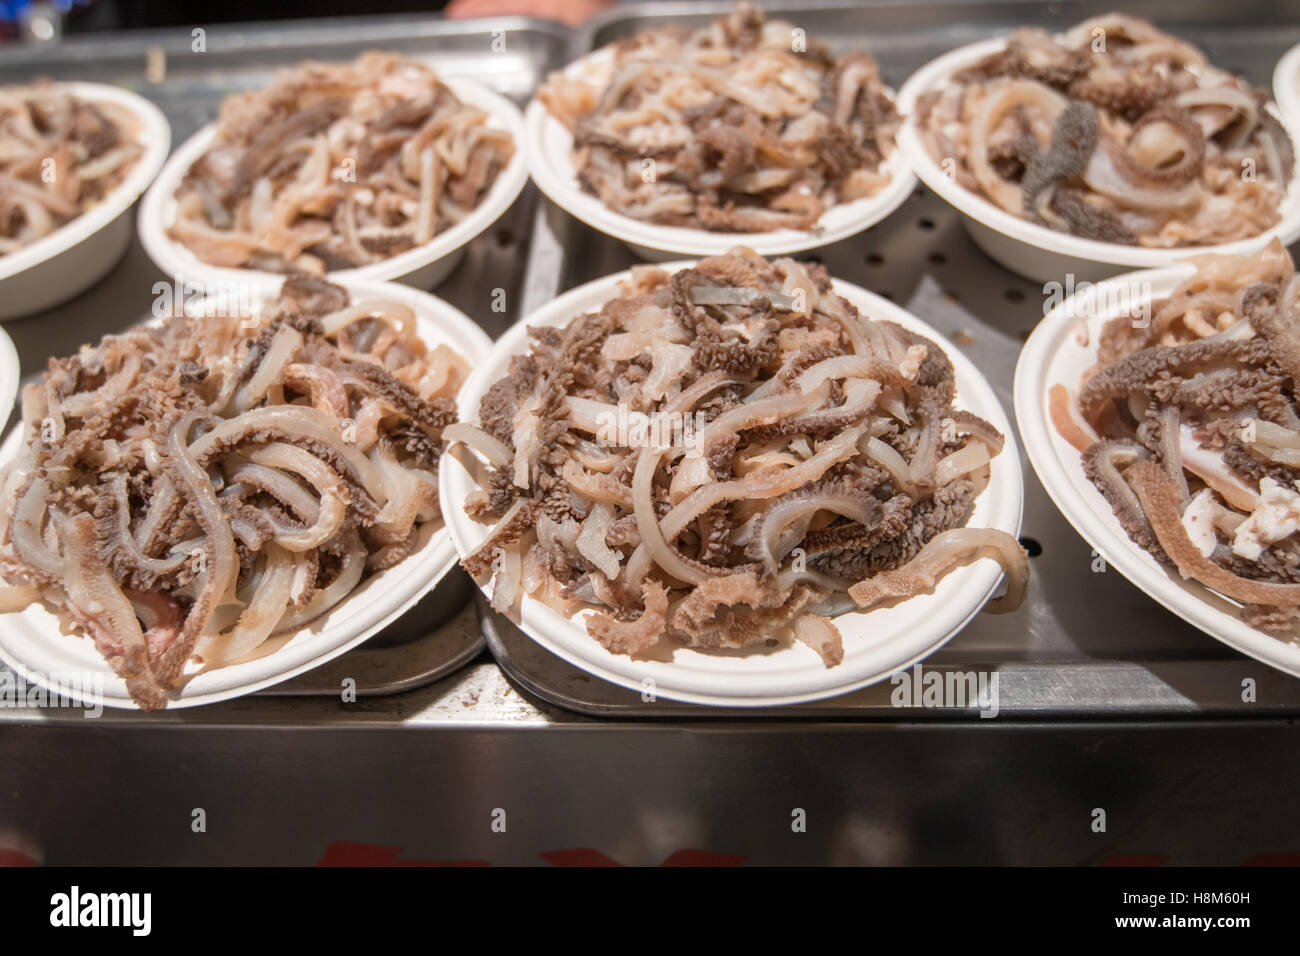 Beijing, China - Plates of octopus for sale at the Donghuamen Snack Night Market, a large outdoor market that is an attraction f Stock Photo